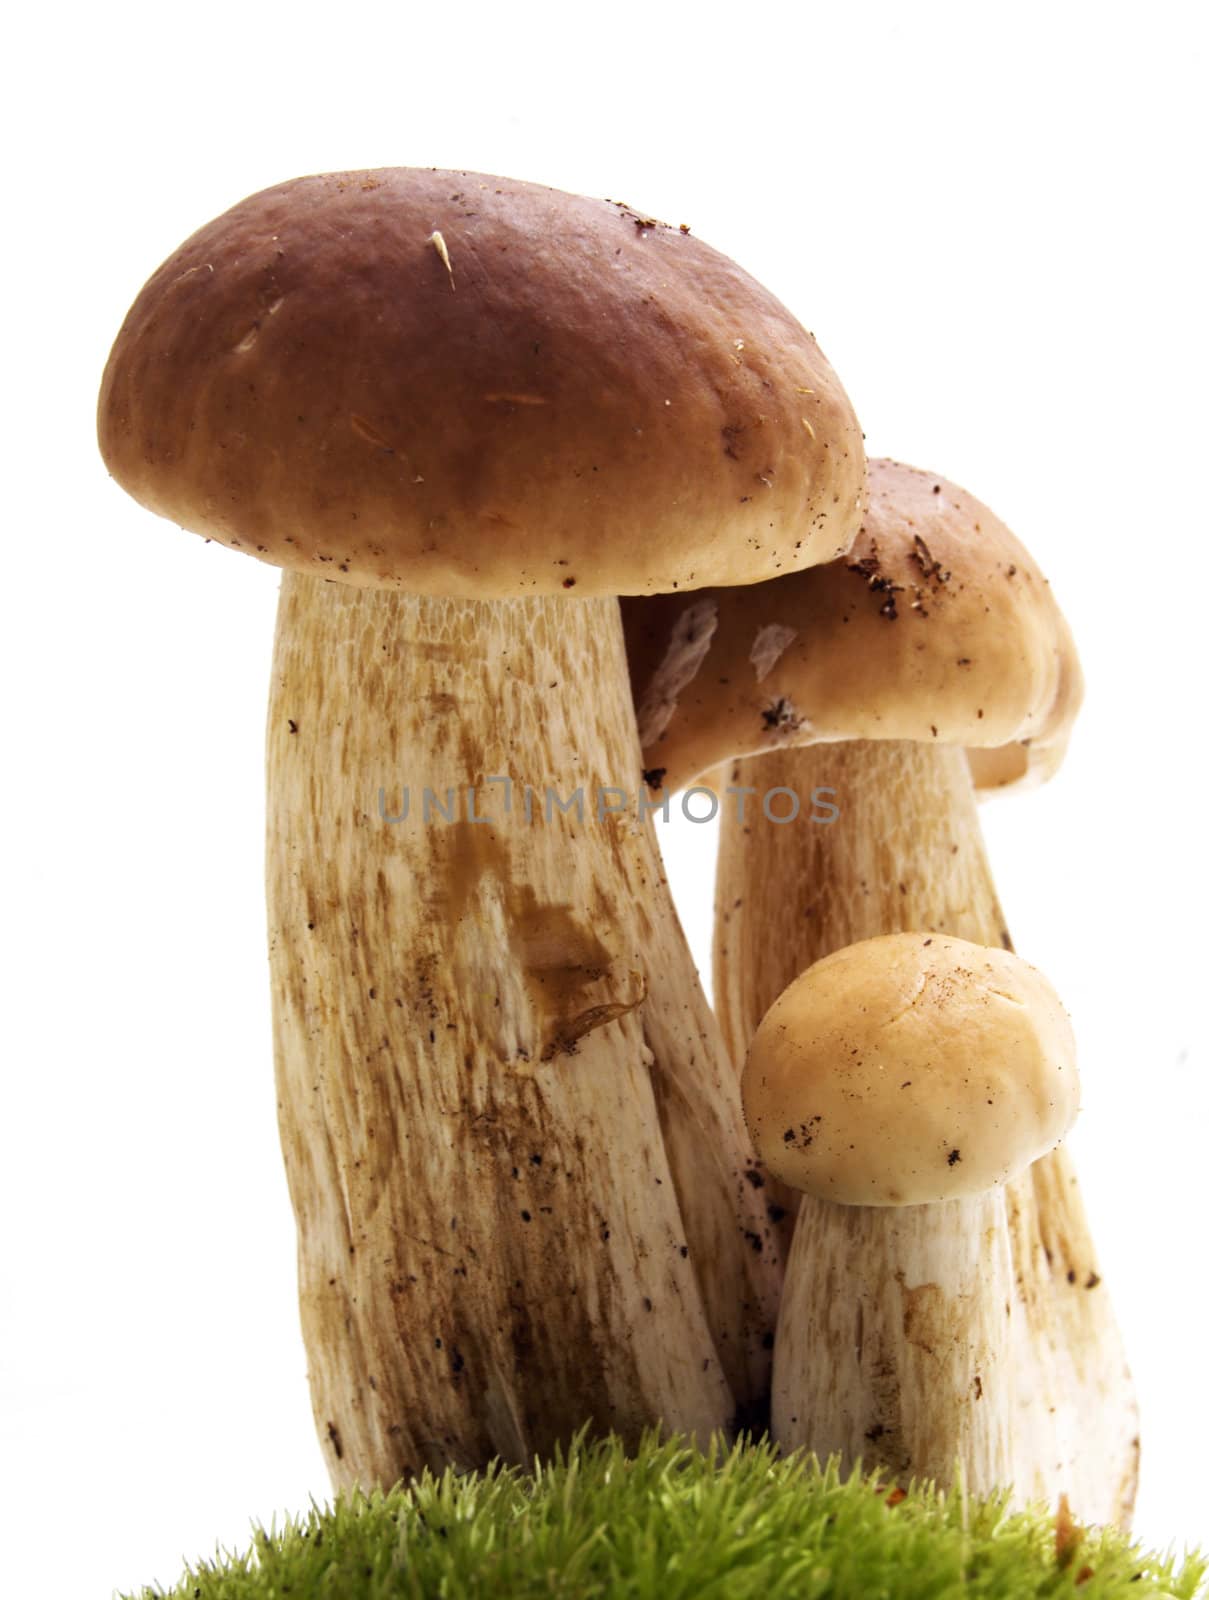 Mushrooms on white - ceps by photocreo